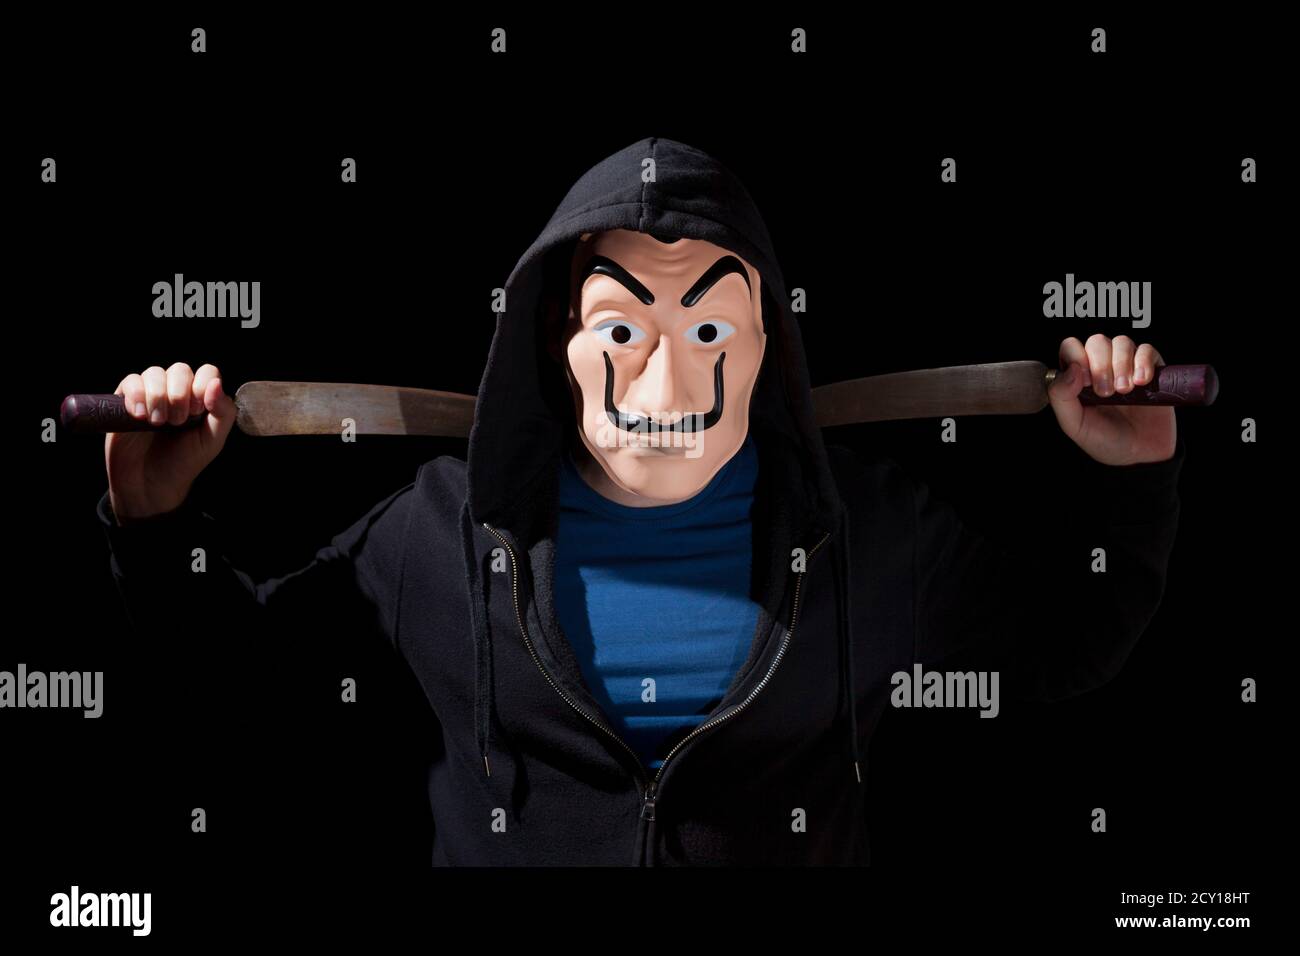 Man armed with a machetes and wearing a mask and a hoodie on black background. Stock Photo